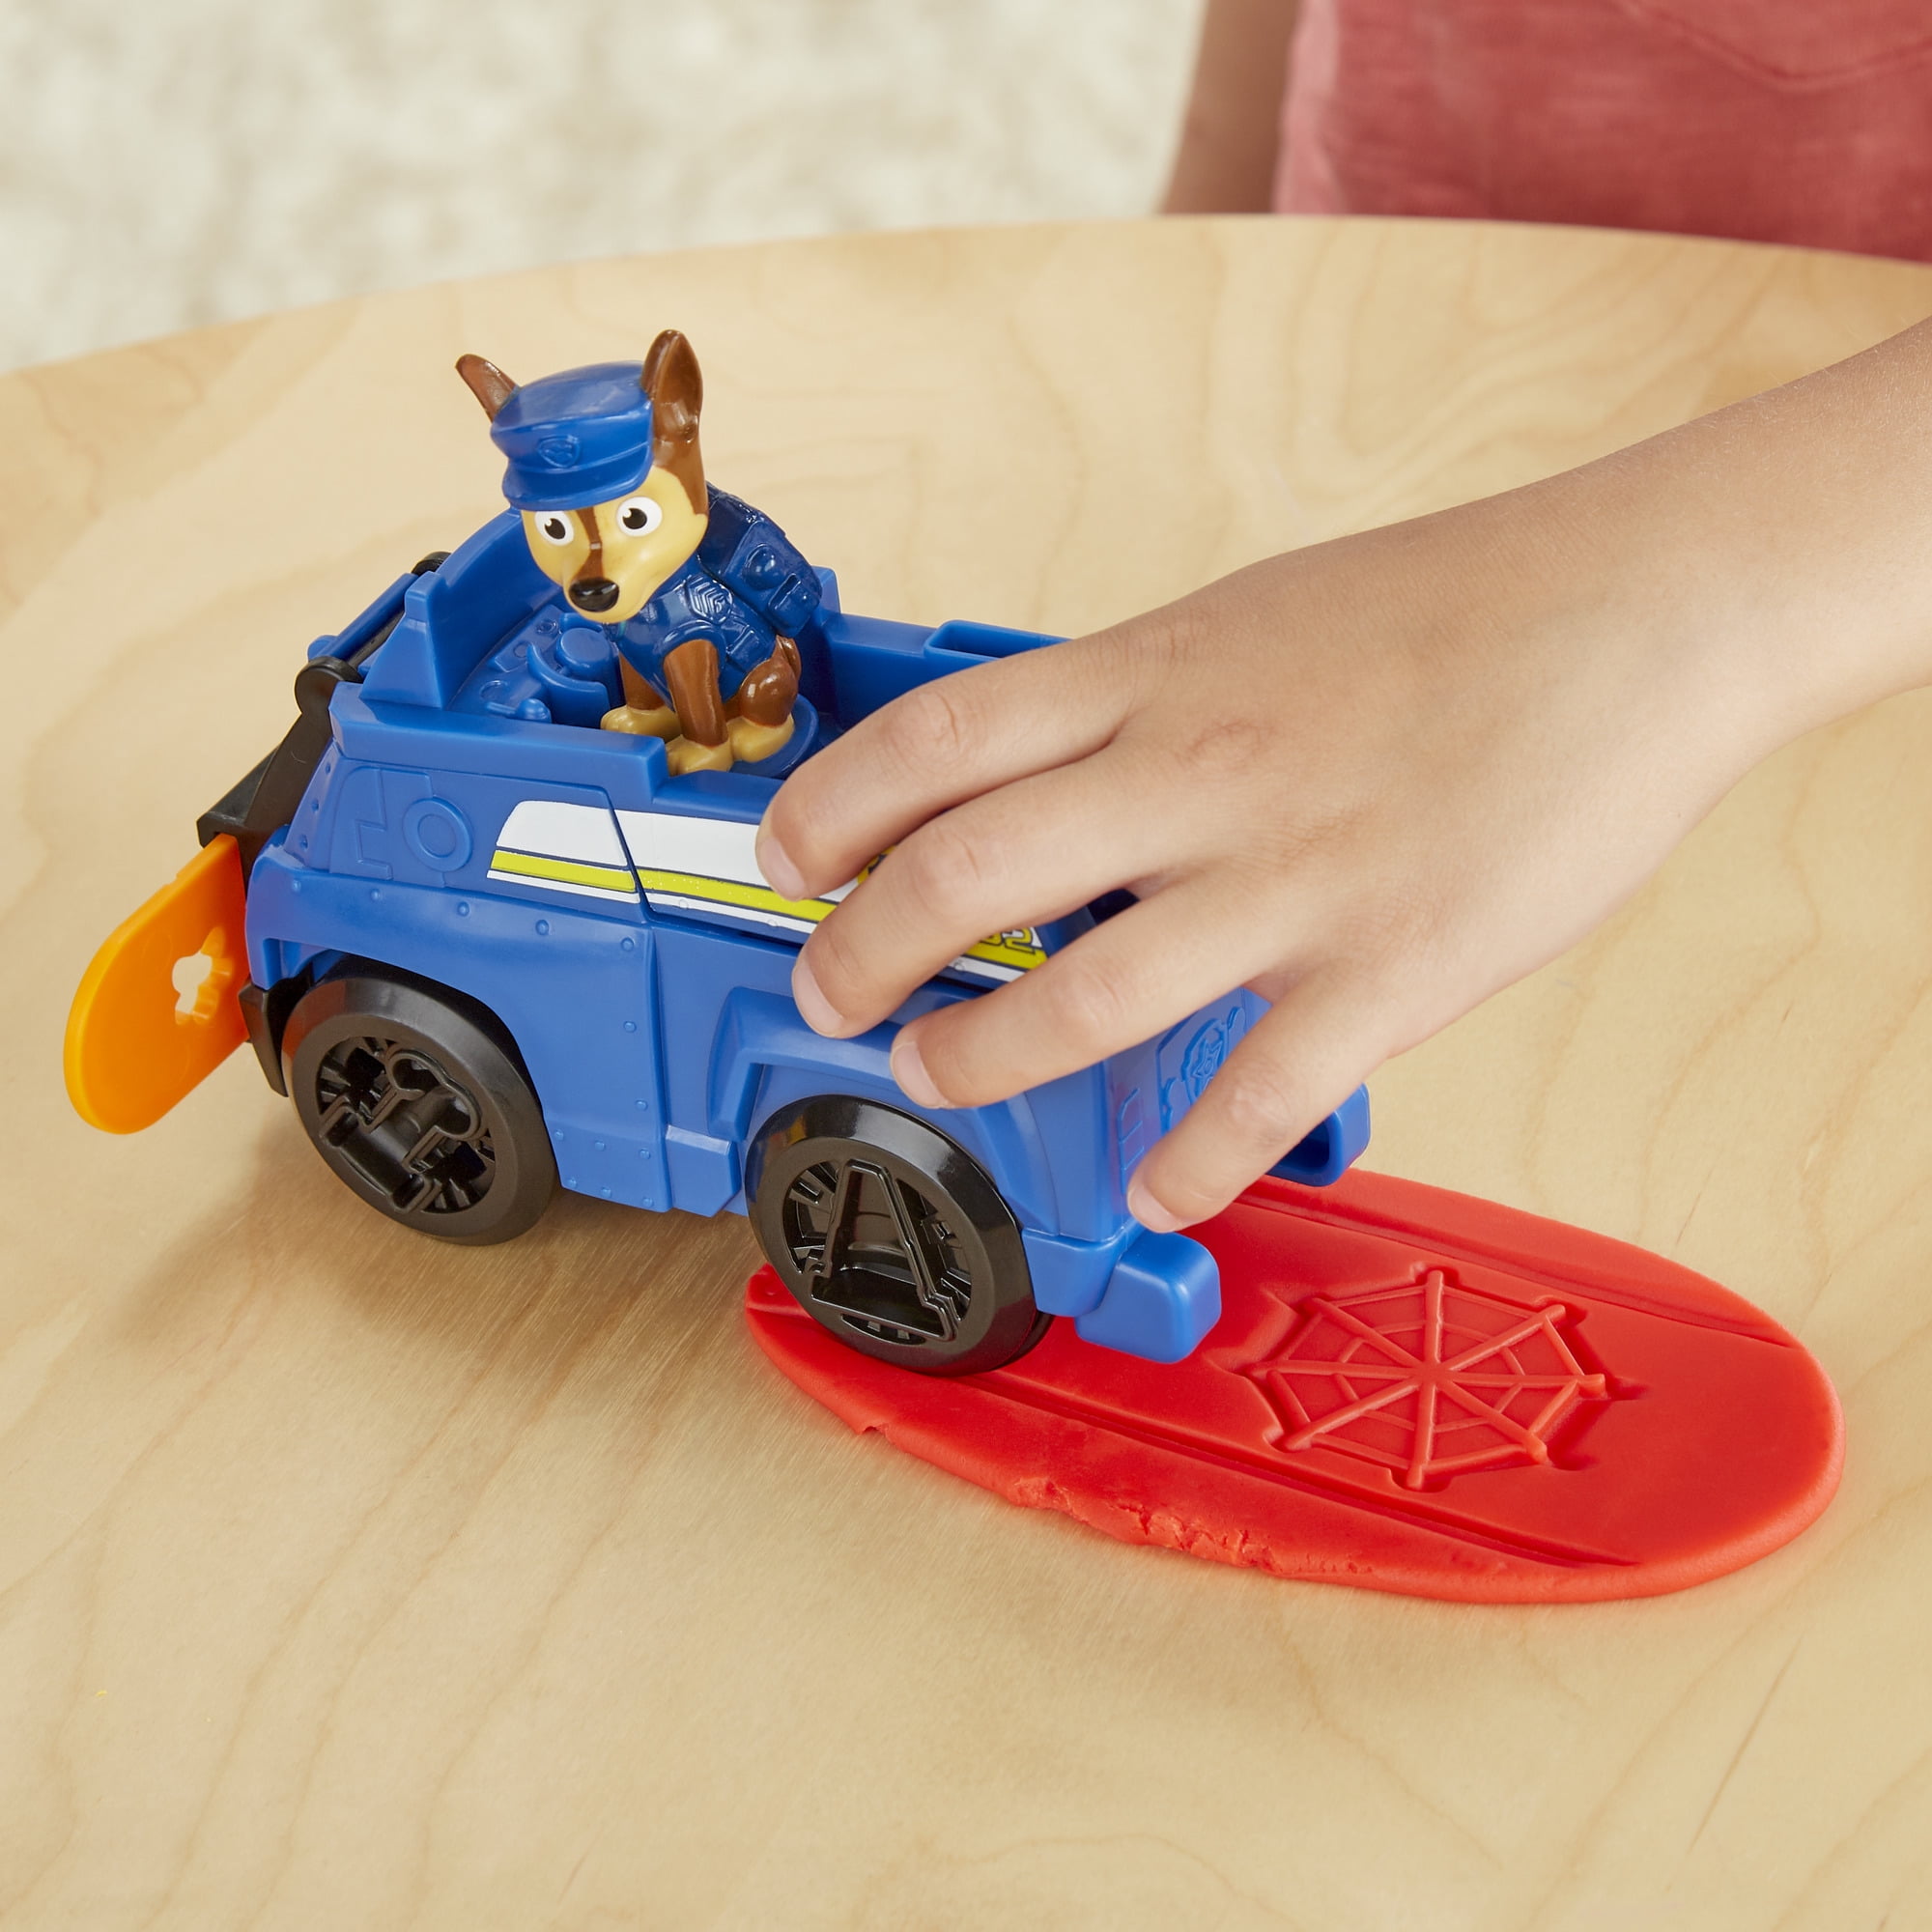 Play-Doh Paw Patrol Rescue Rolling Chase Toy Police Cruiser Figure & Vehicle Set with 4 Non-Toxic Colors 